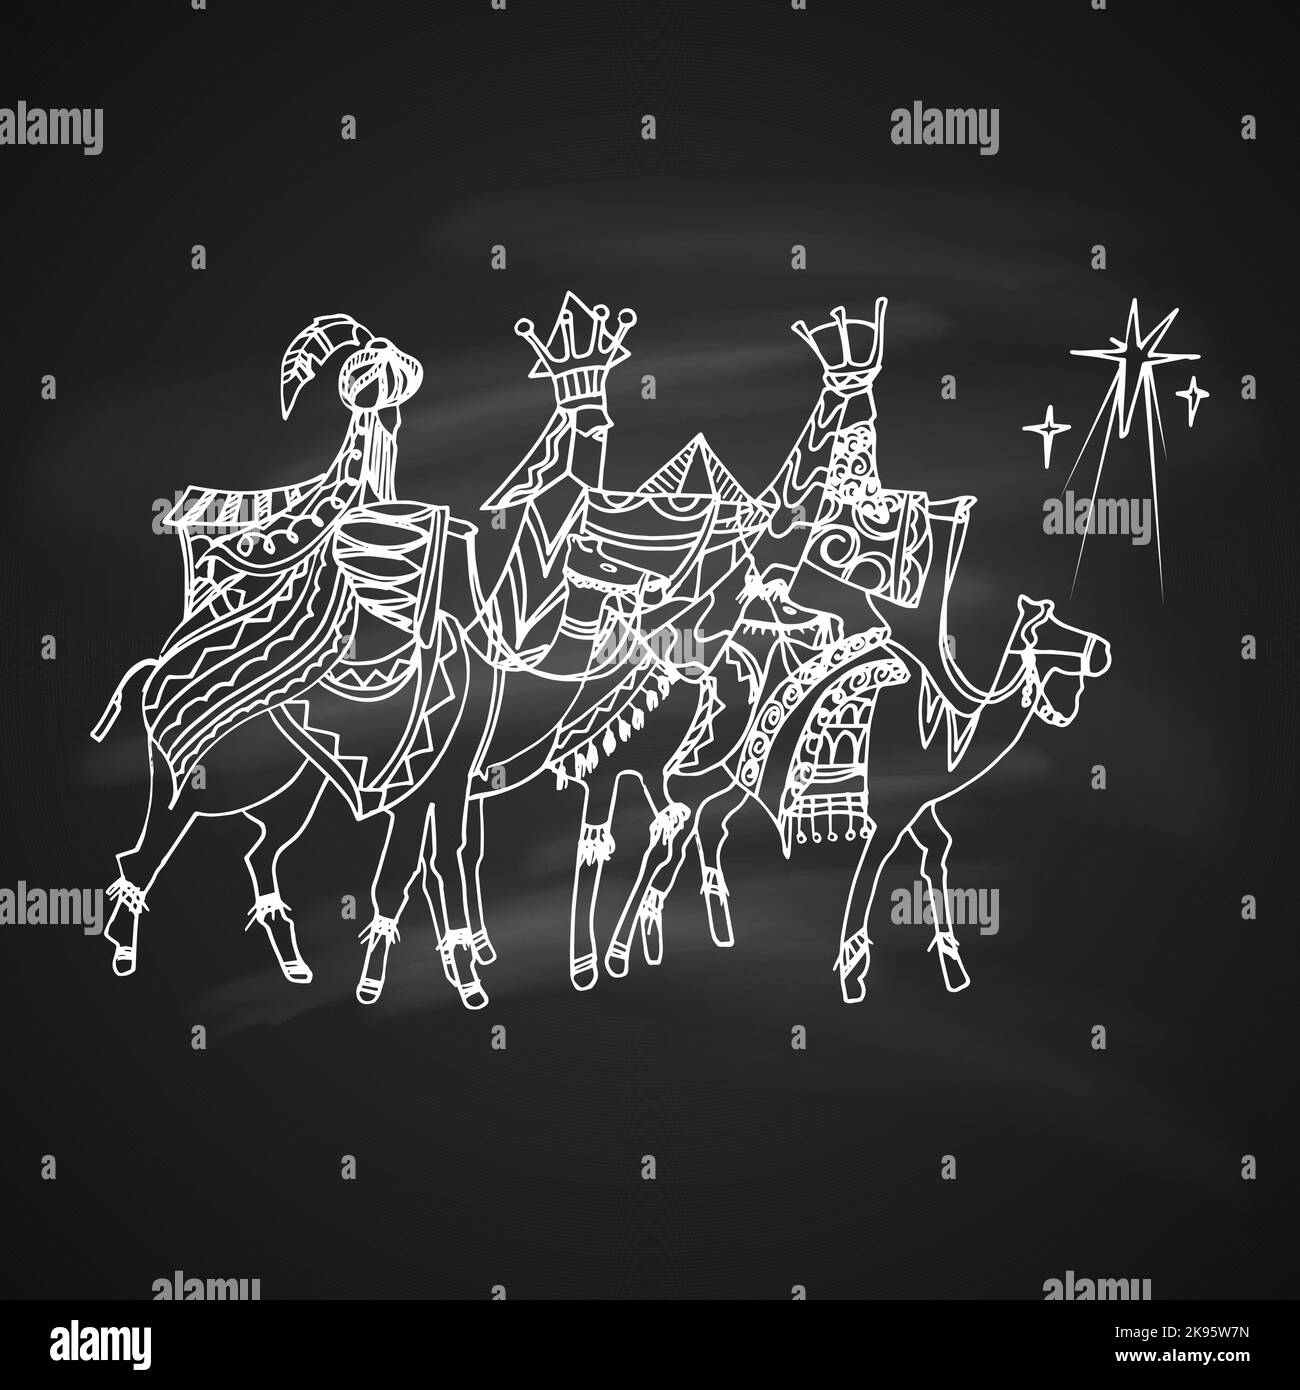 Chalk Drawing Illustration for Merry Christmas and Happy New Year Print Design. Three wise men following the star of Bethlehem Stock Vector